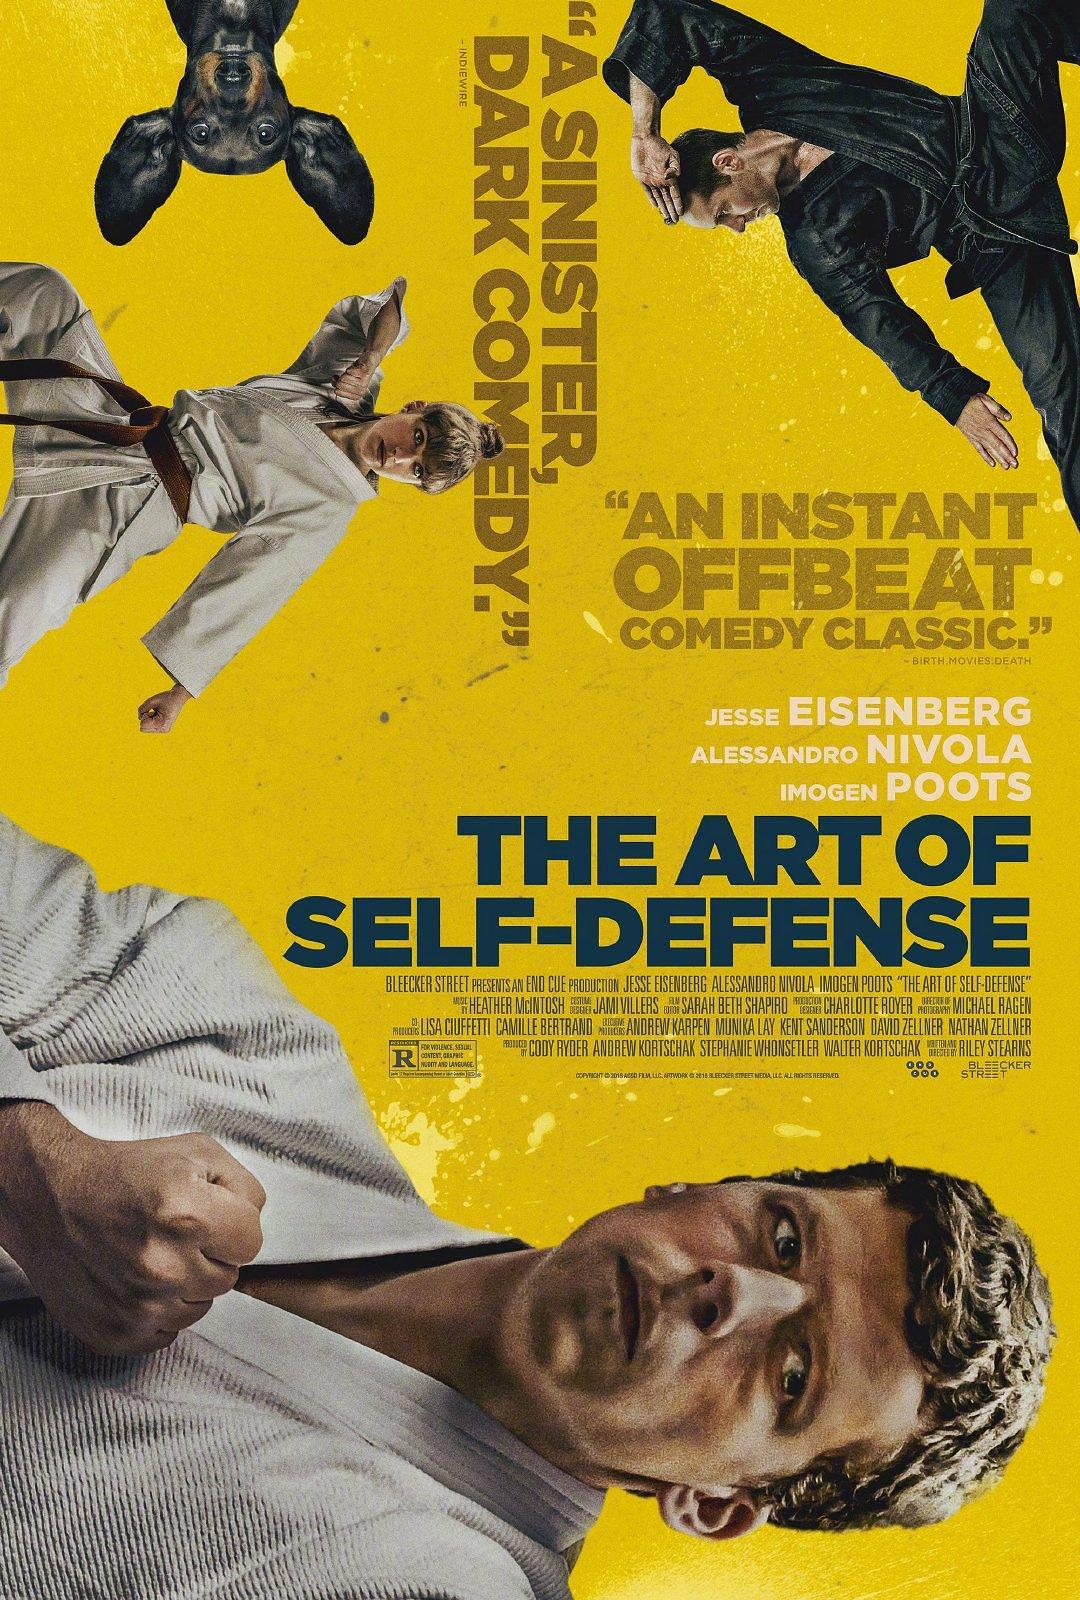  The.Art.of.Self.Defense.2019.1080p.BluRay.x264.DTS-HD.MA.5.1-FGT 9.97GB-1.png